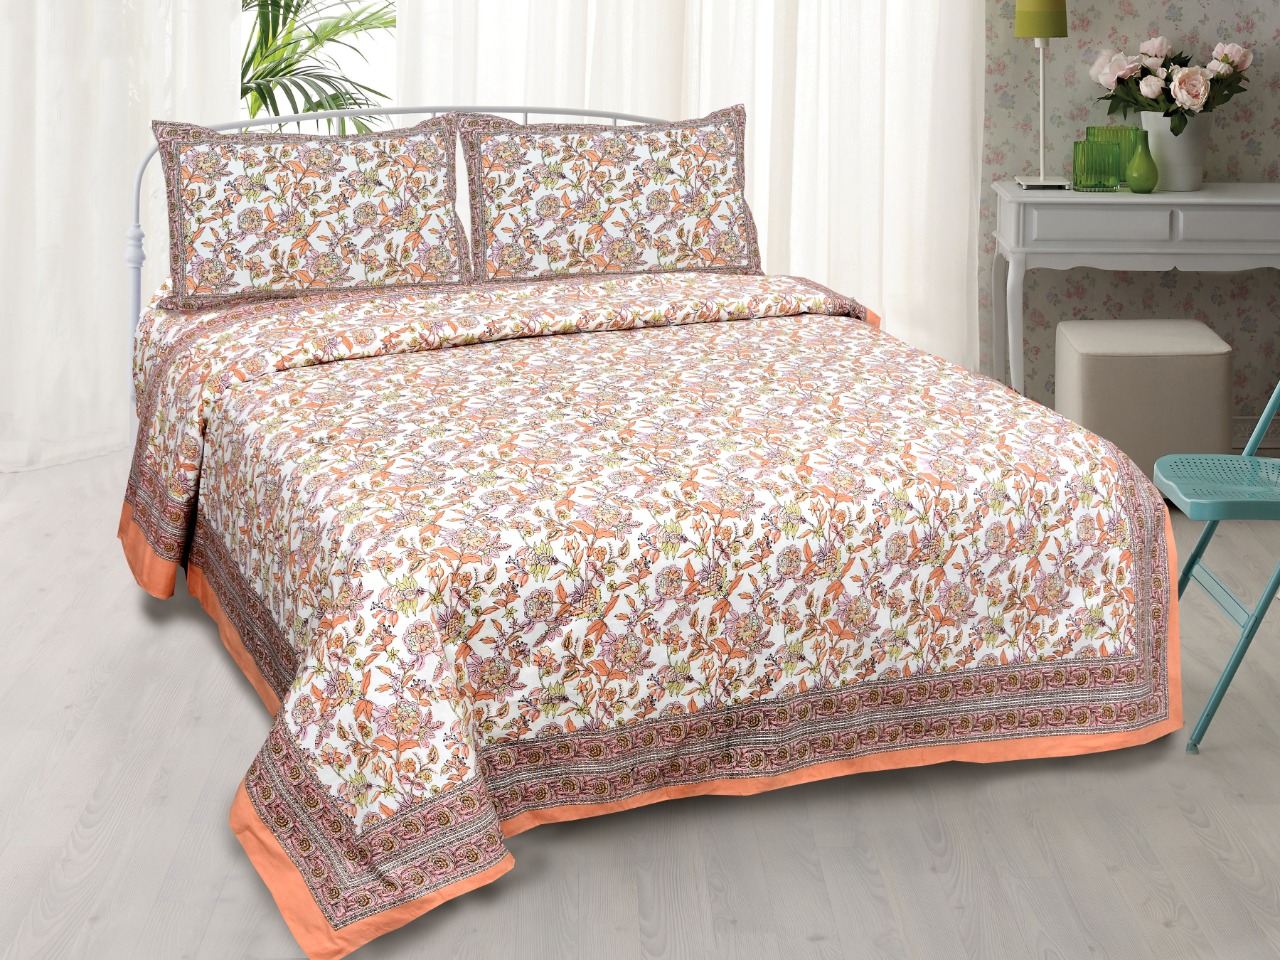 COMBO367 Beautiful Peach Ethnic Combo Set of 1 Single and 1 Double Bedsheet With 3 Pillow Cover